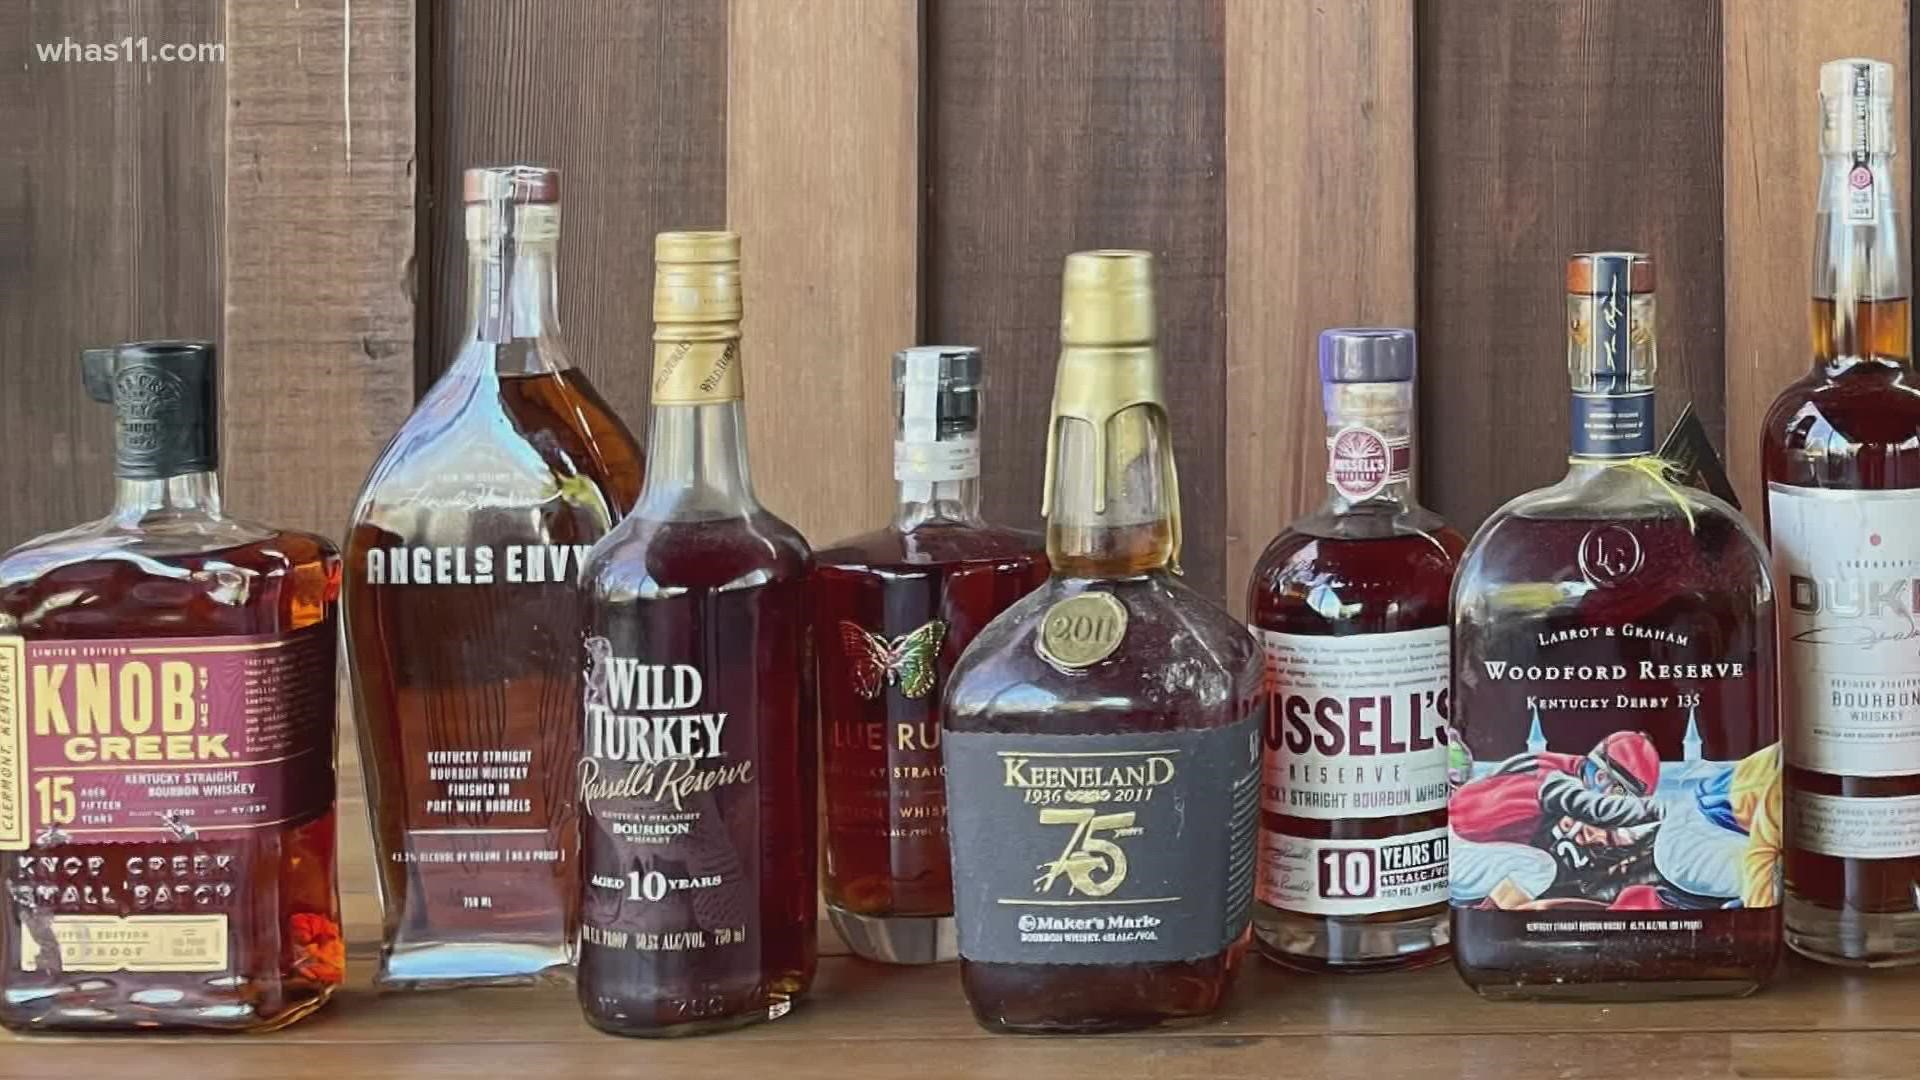 Carr's Steakhouse found 14 bottles of bourbon in the rubble and all of them were still in tact. The family who runs the restaurant donated them to a benefit auction.